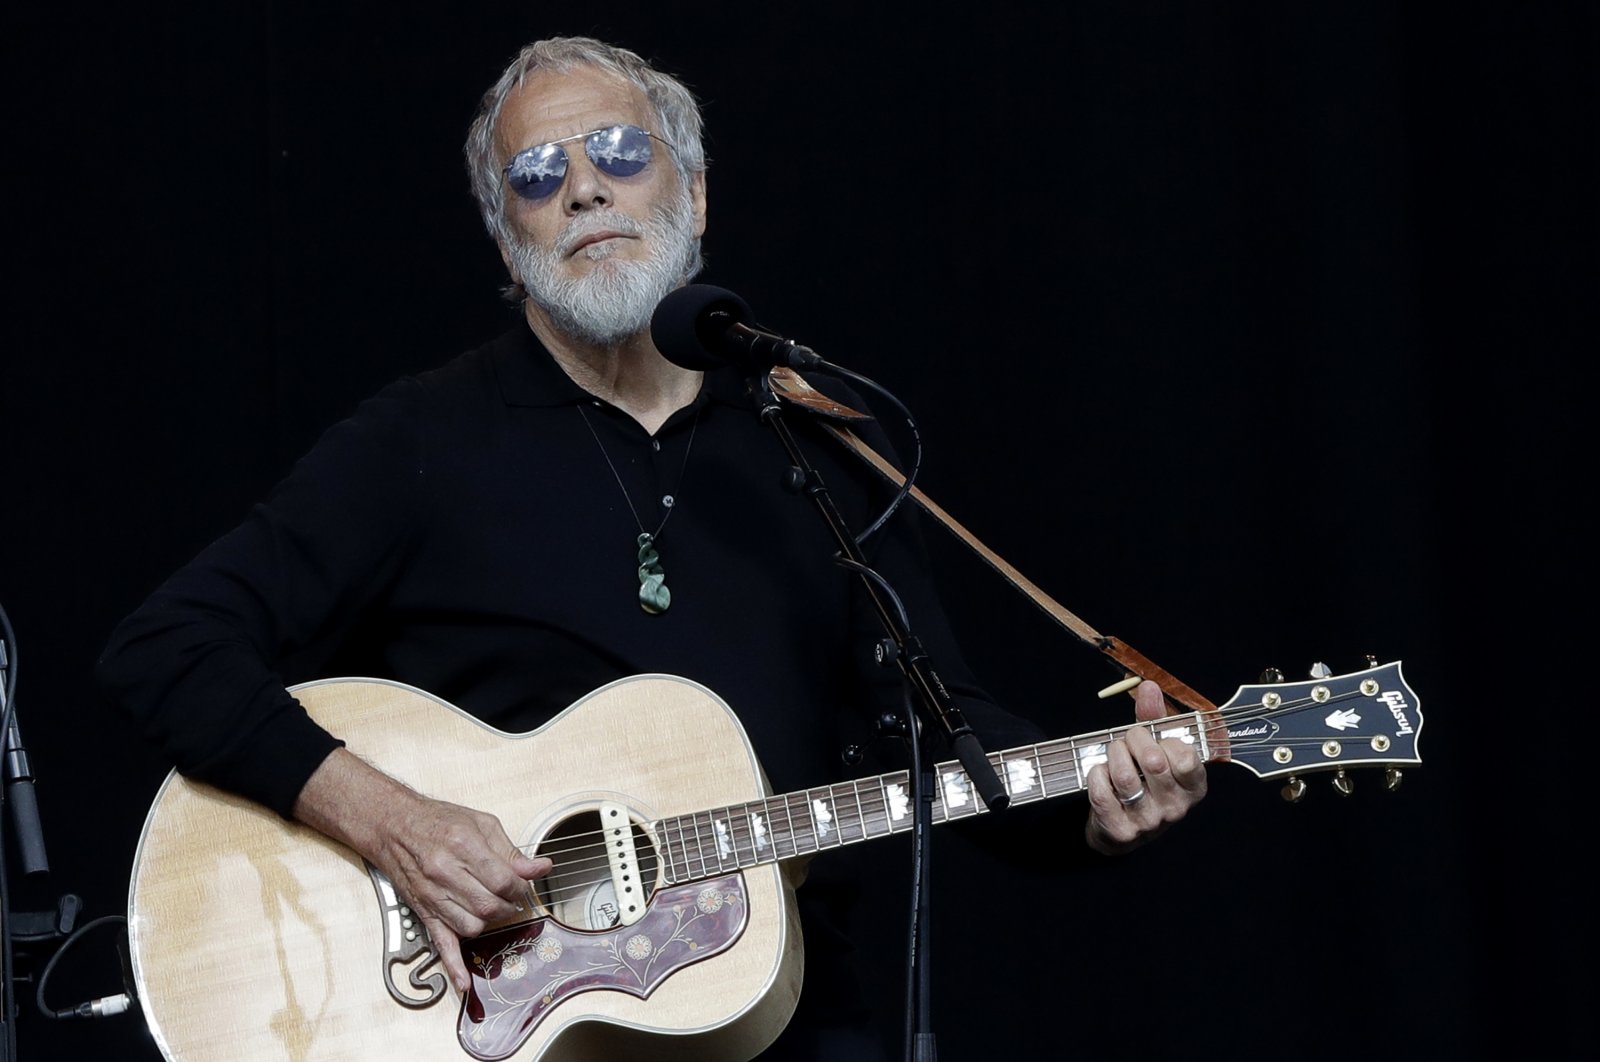 Yusuf Islam/Cat Stevens sings during a national remembrance service in Hagley Park for the victims of the March 15 mosque terrorist attack in Christchurch, New Zealand, March 29, 2019. (AP File Photo)